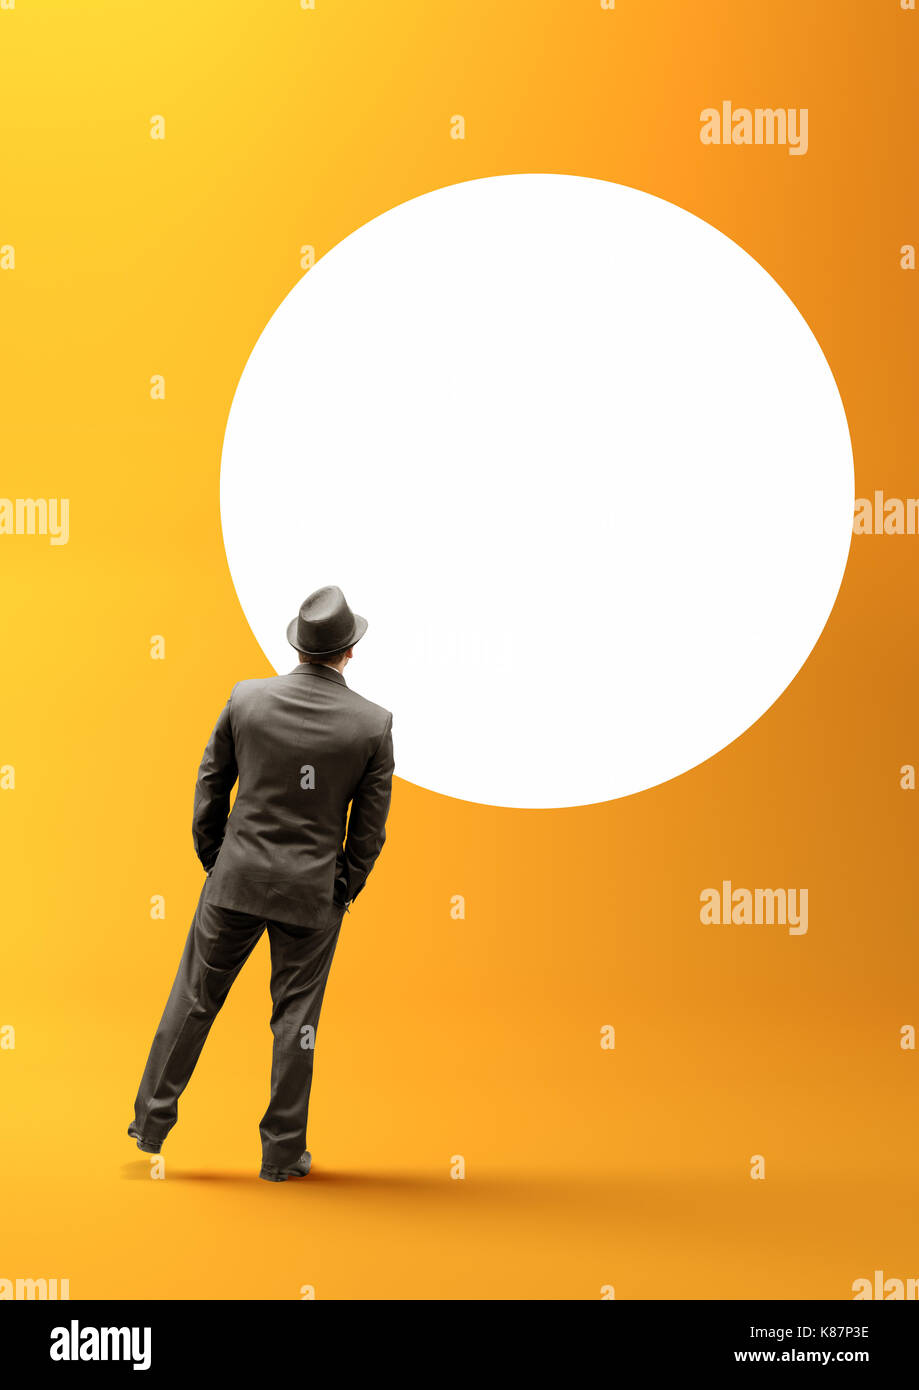 A smart businessman staring into a blank white circle. Stock Photo